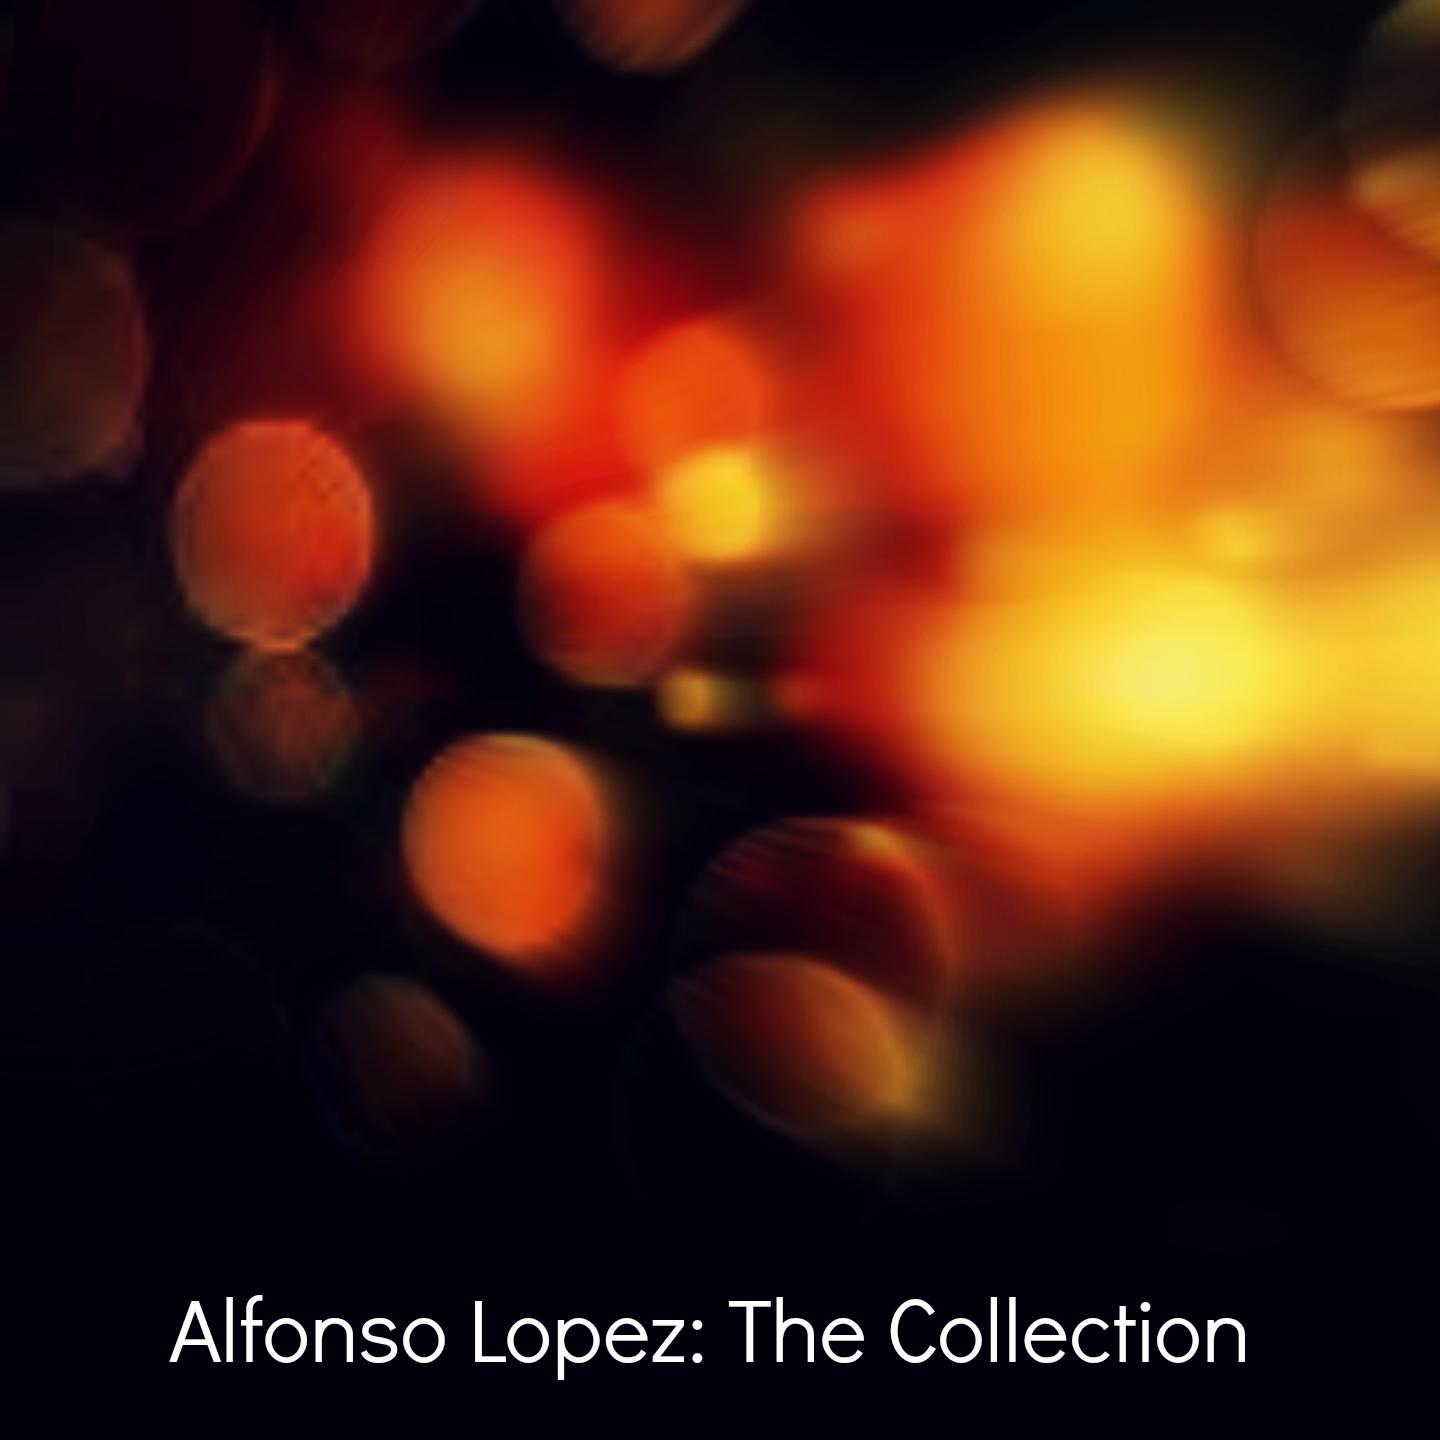 Alfonso Lopez: The Collection